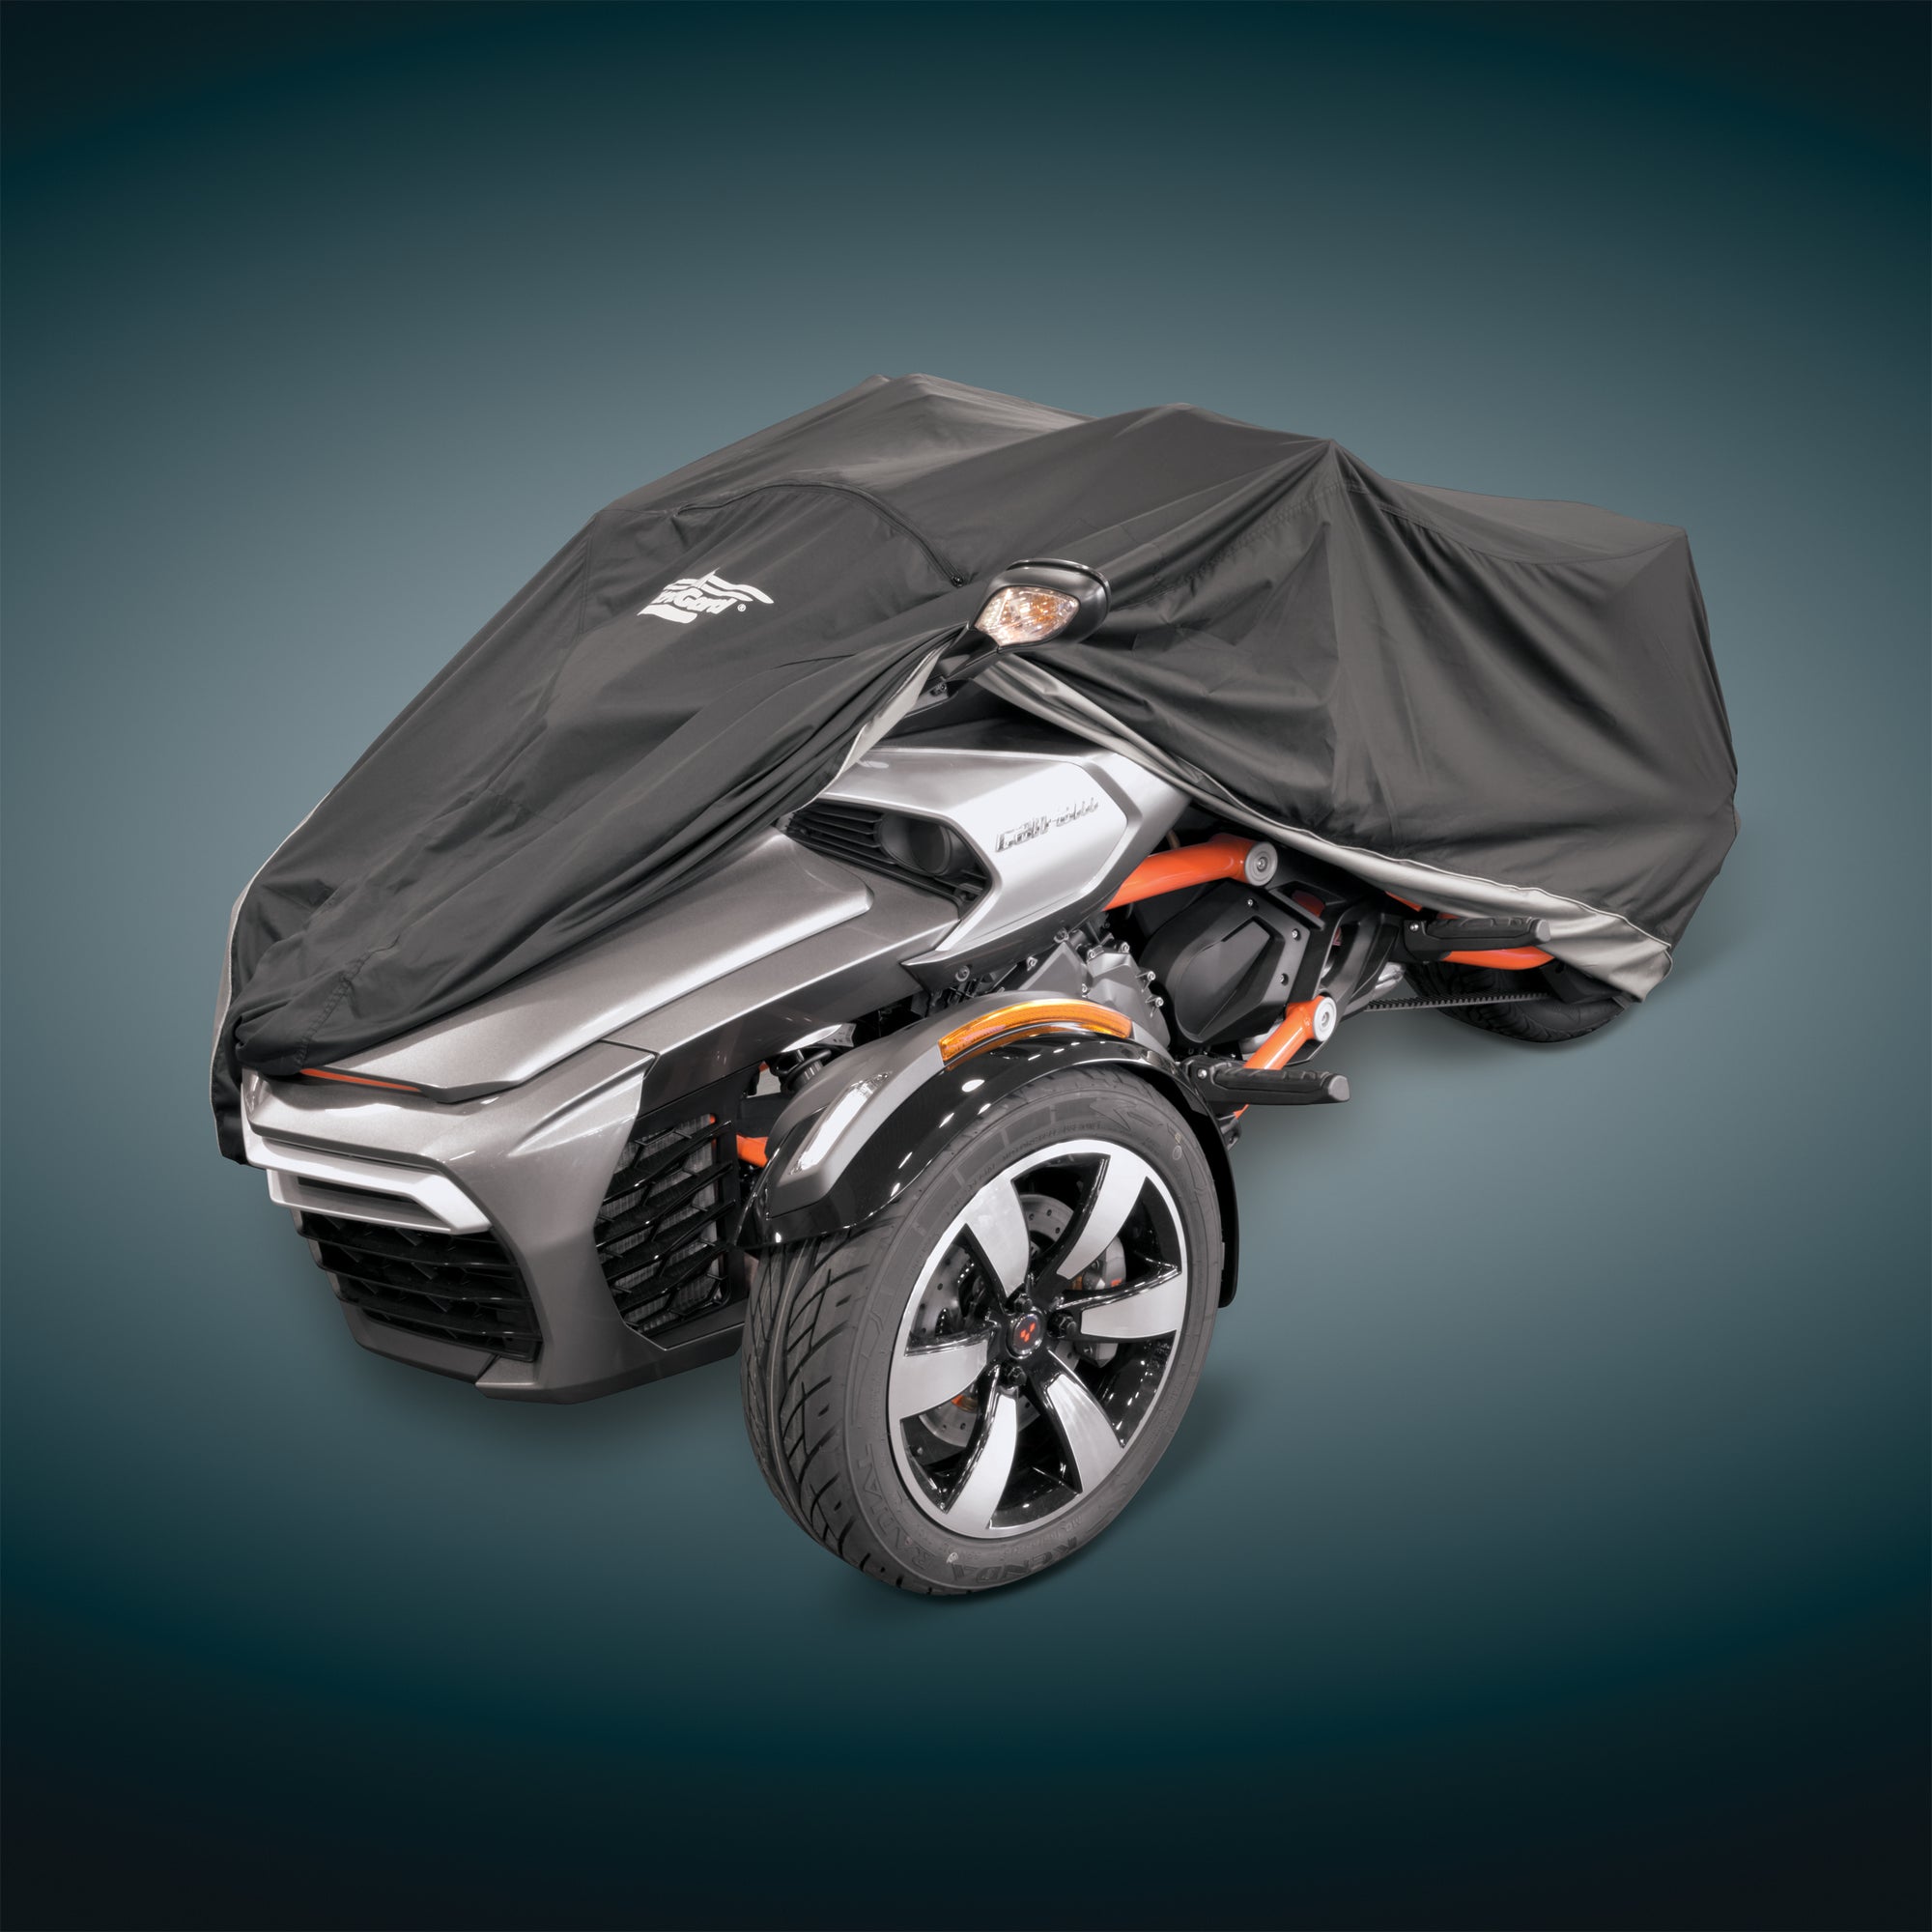 Ultragard® BLACK and gray complete cover for the Can-Am Spyder F3 series